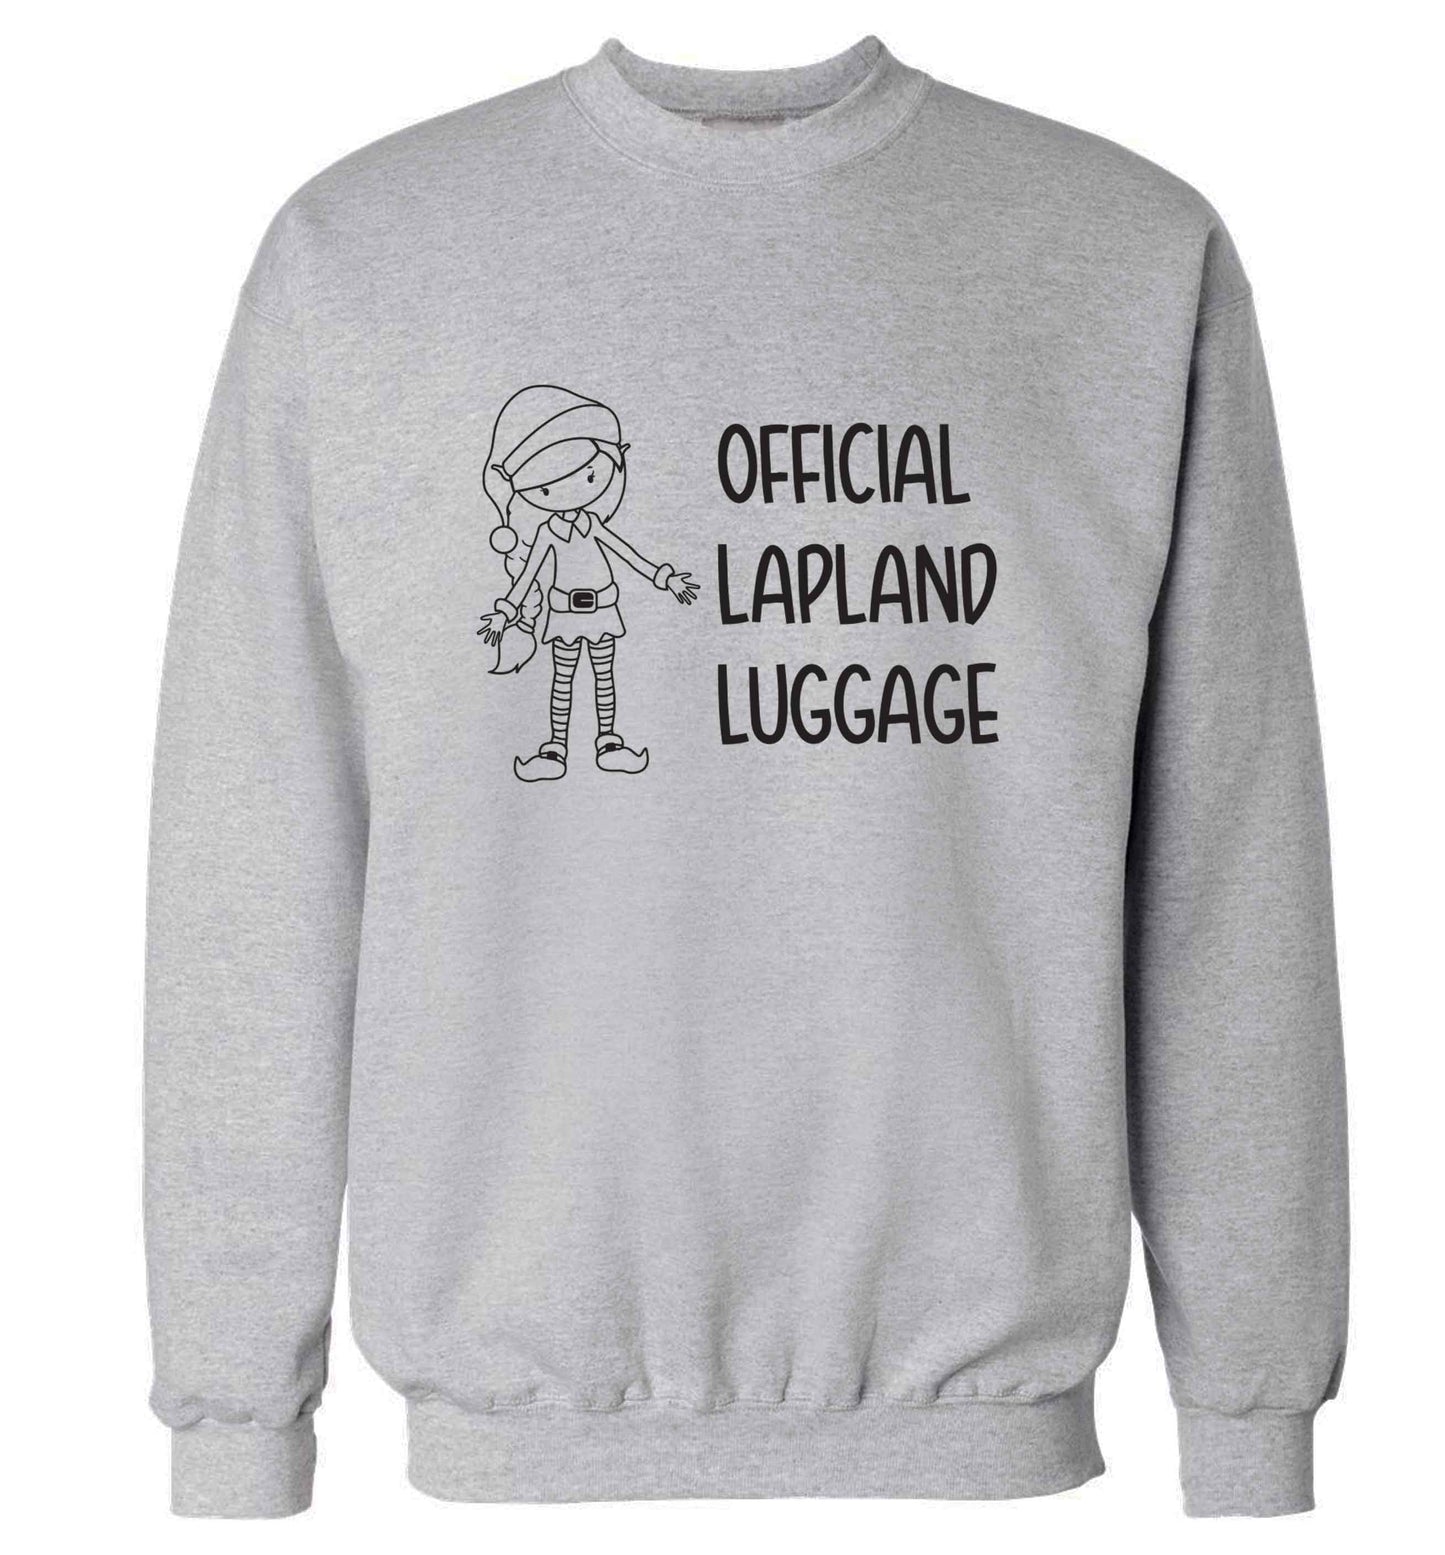 Official lapland luggage - Elf snowflake adult's unisex grey sweater 2XL